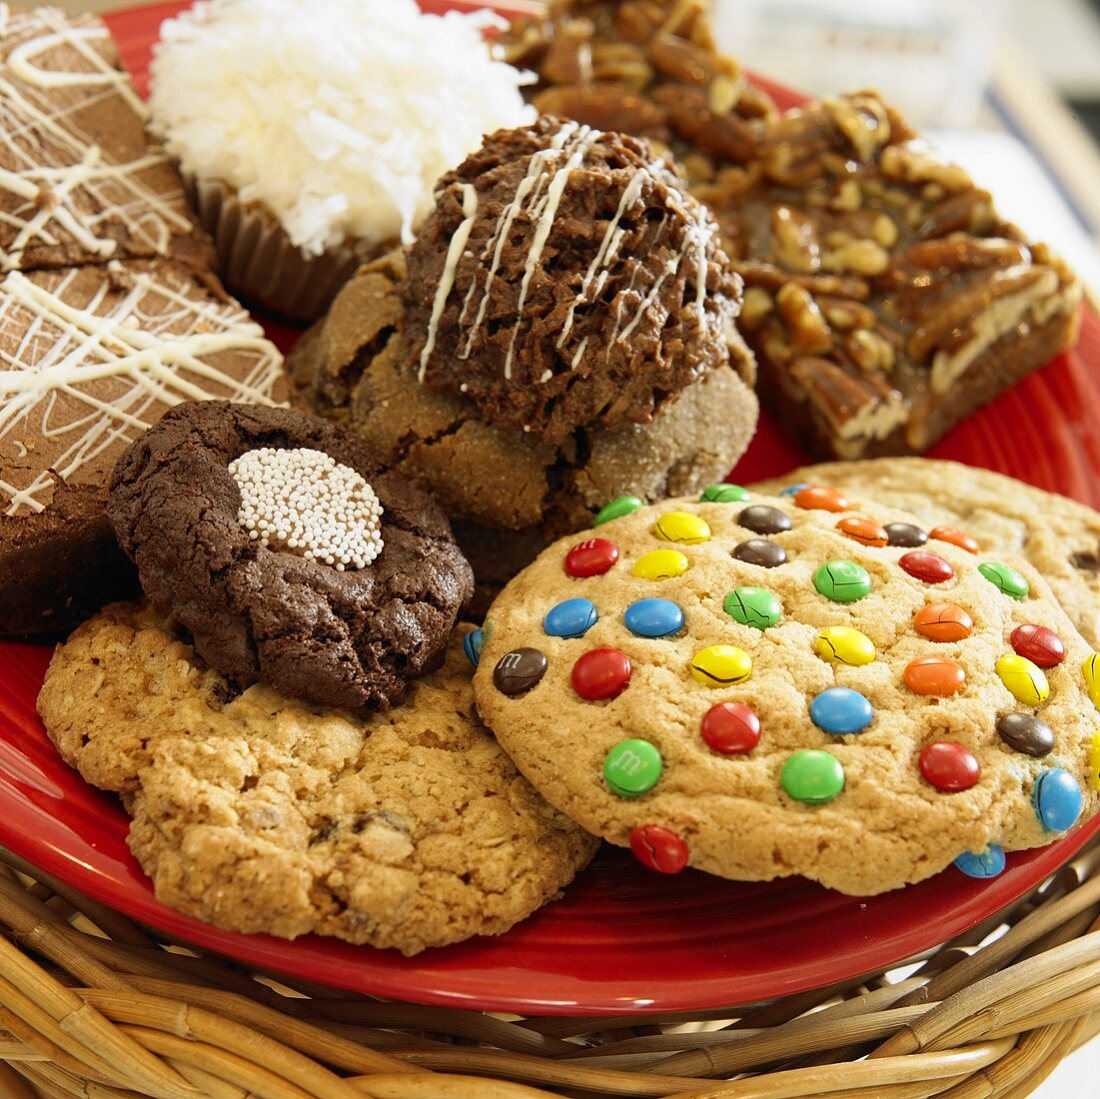 Variety of Cookies on a Red Plate